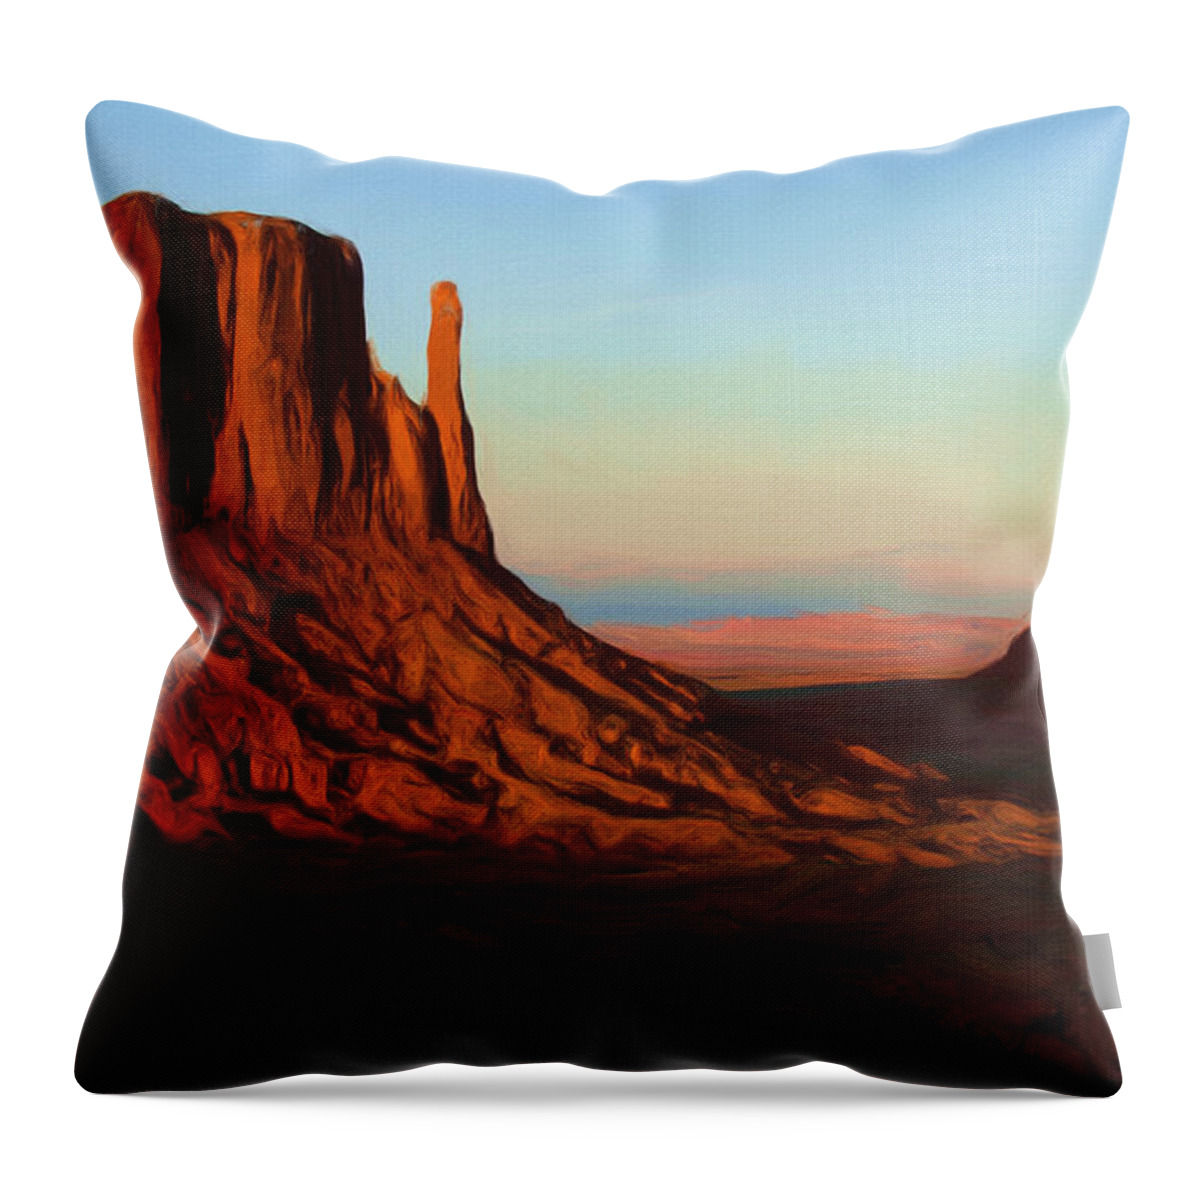 Monument Valley Throw Pillow featuring the painting Monument Valley 2 by Inspirowl Design